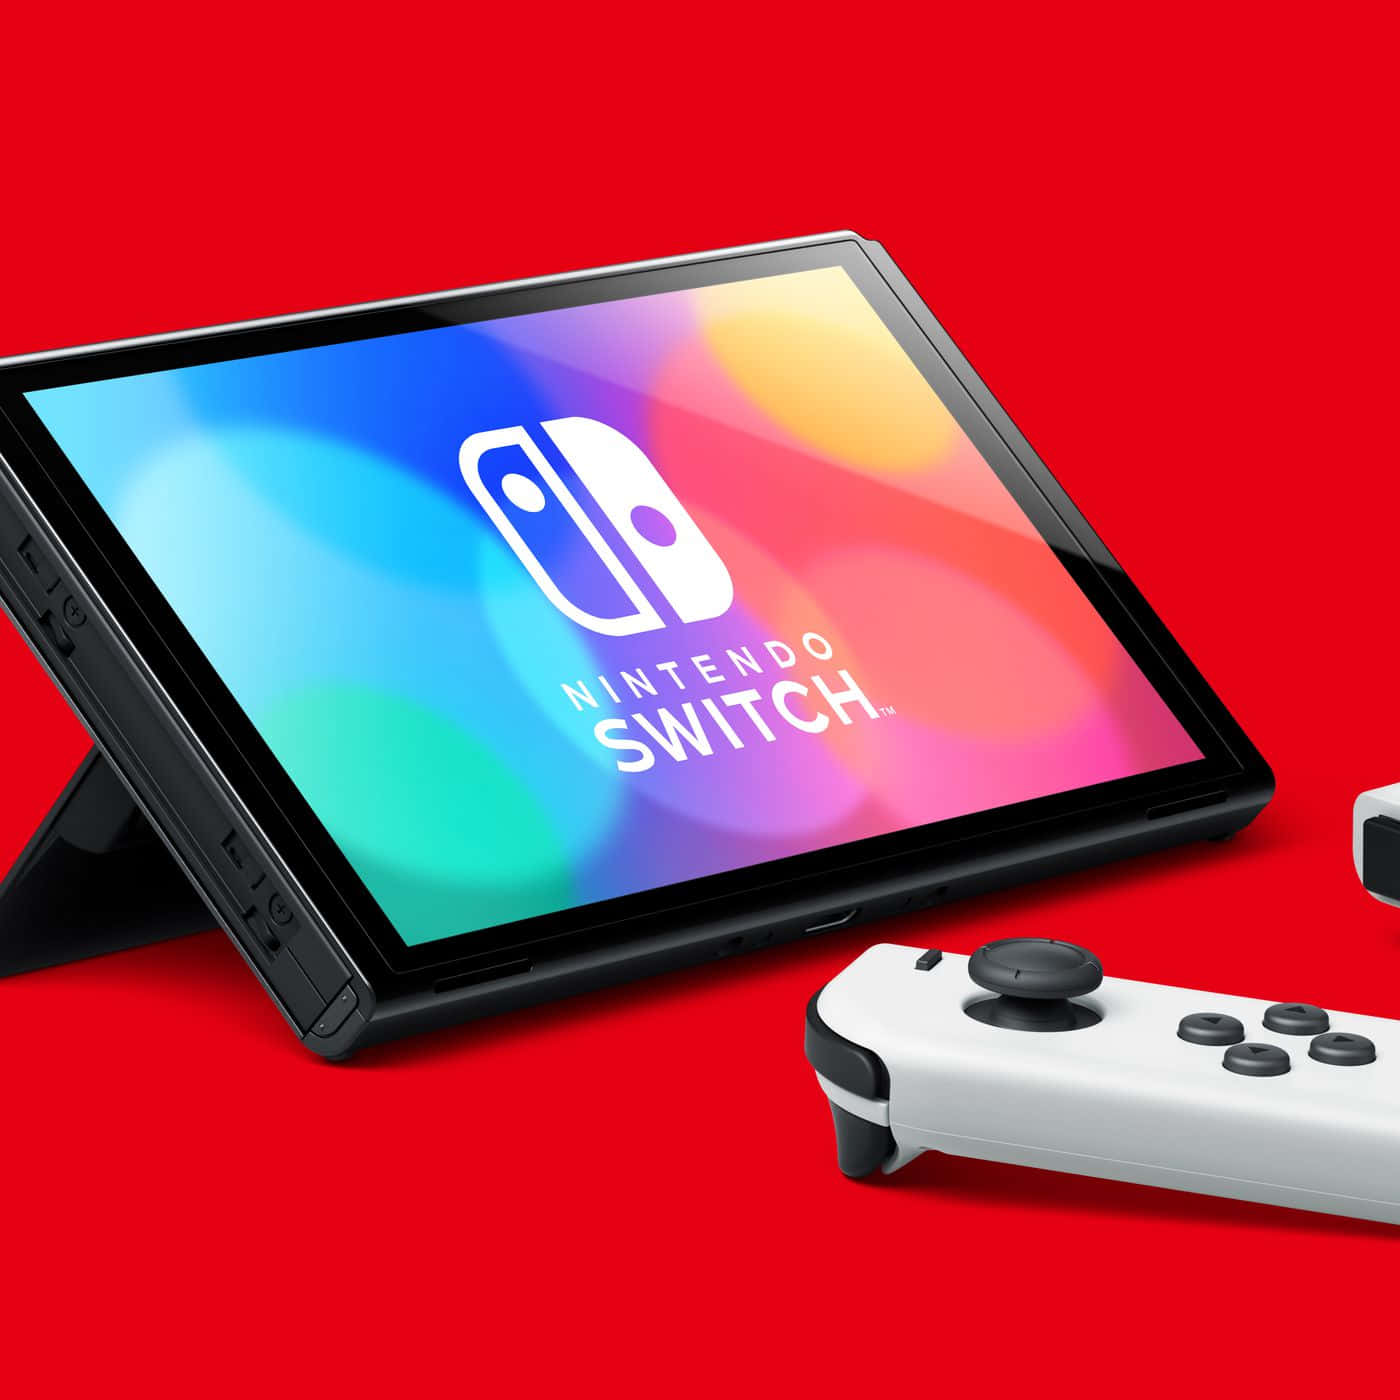 The fun of anytime - anytime with the Nintendo Switch